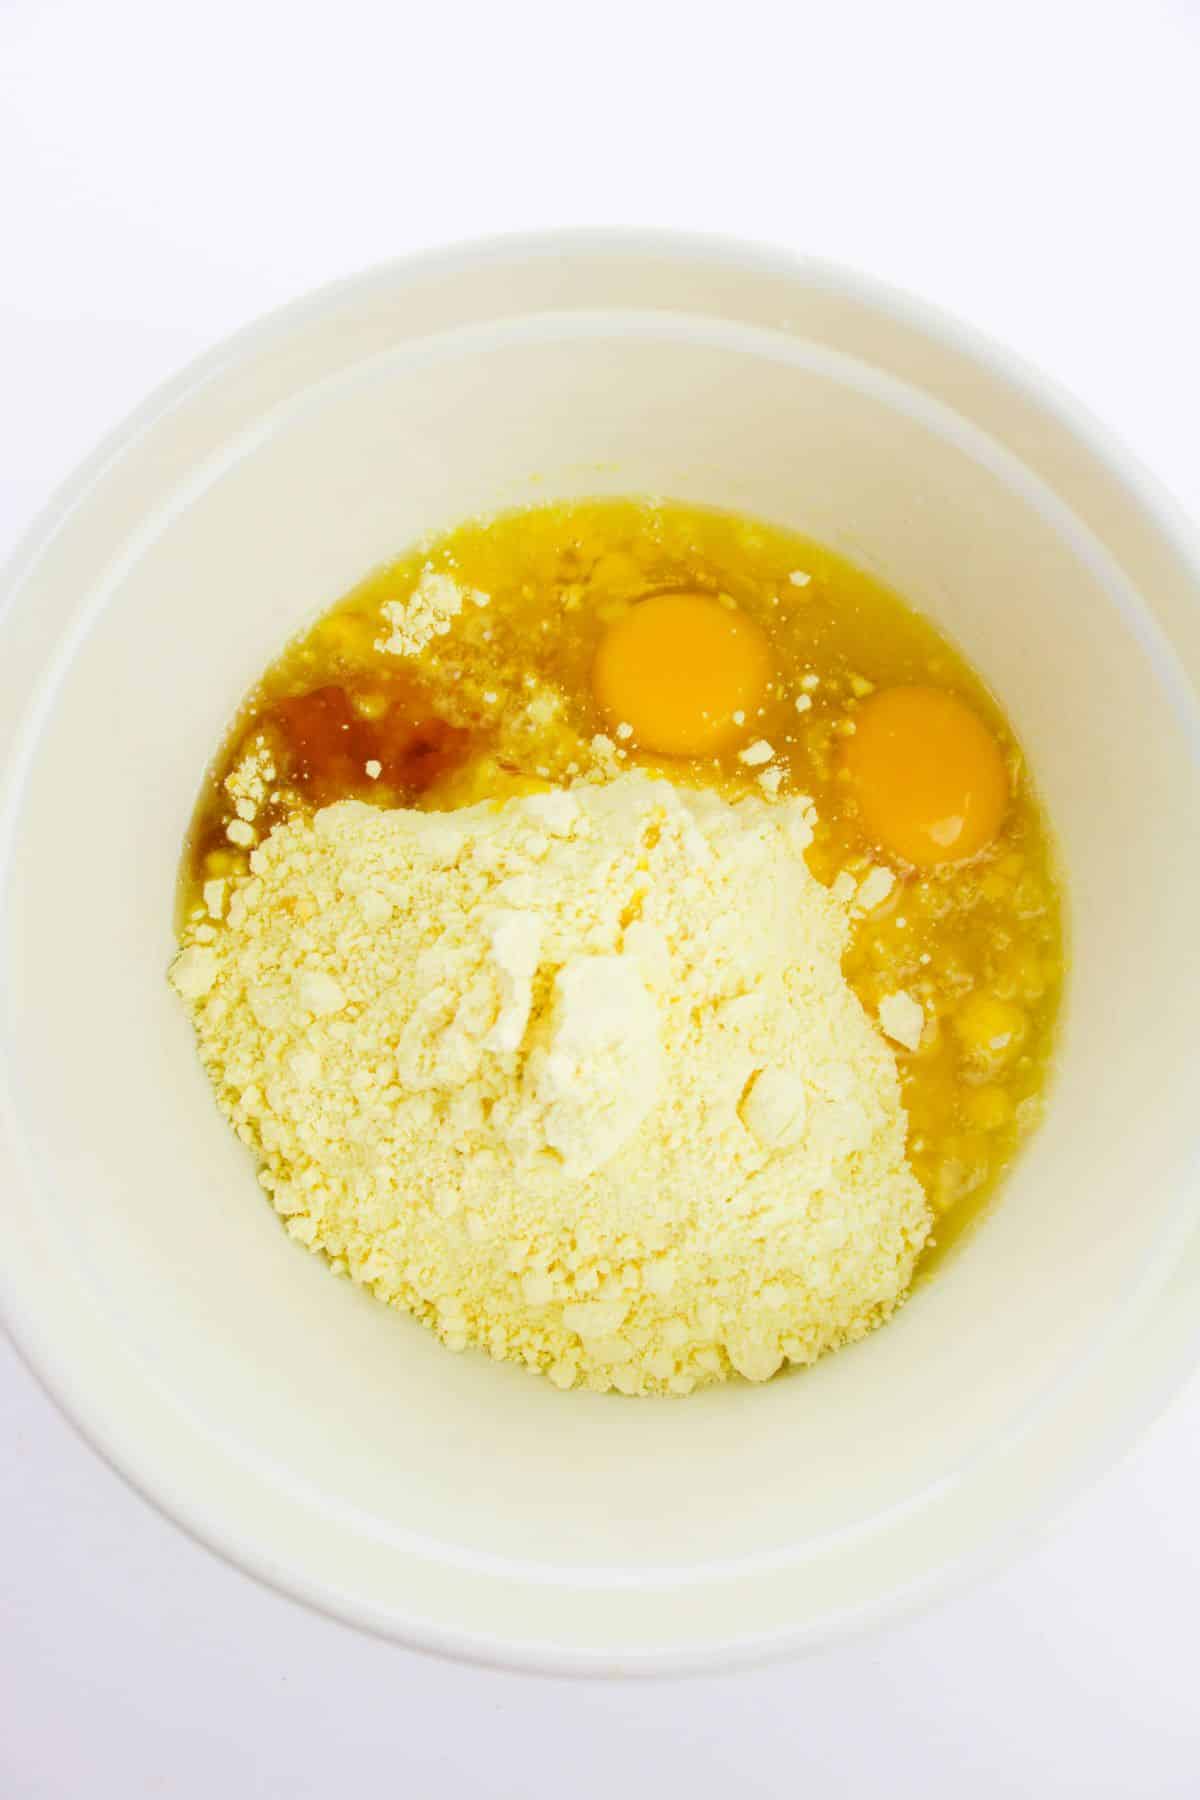 Cake mix, vegetable oil, eggs, and vanilla extract in a large bowl